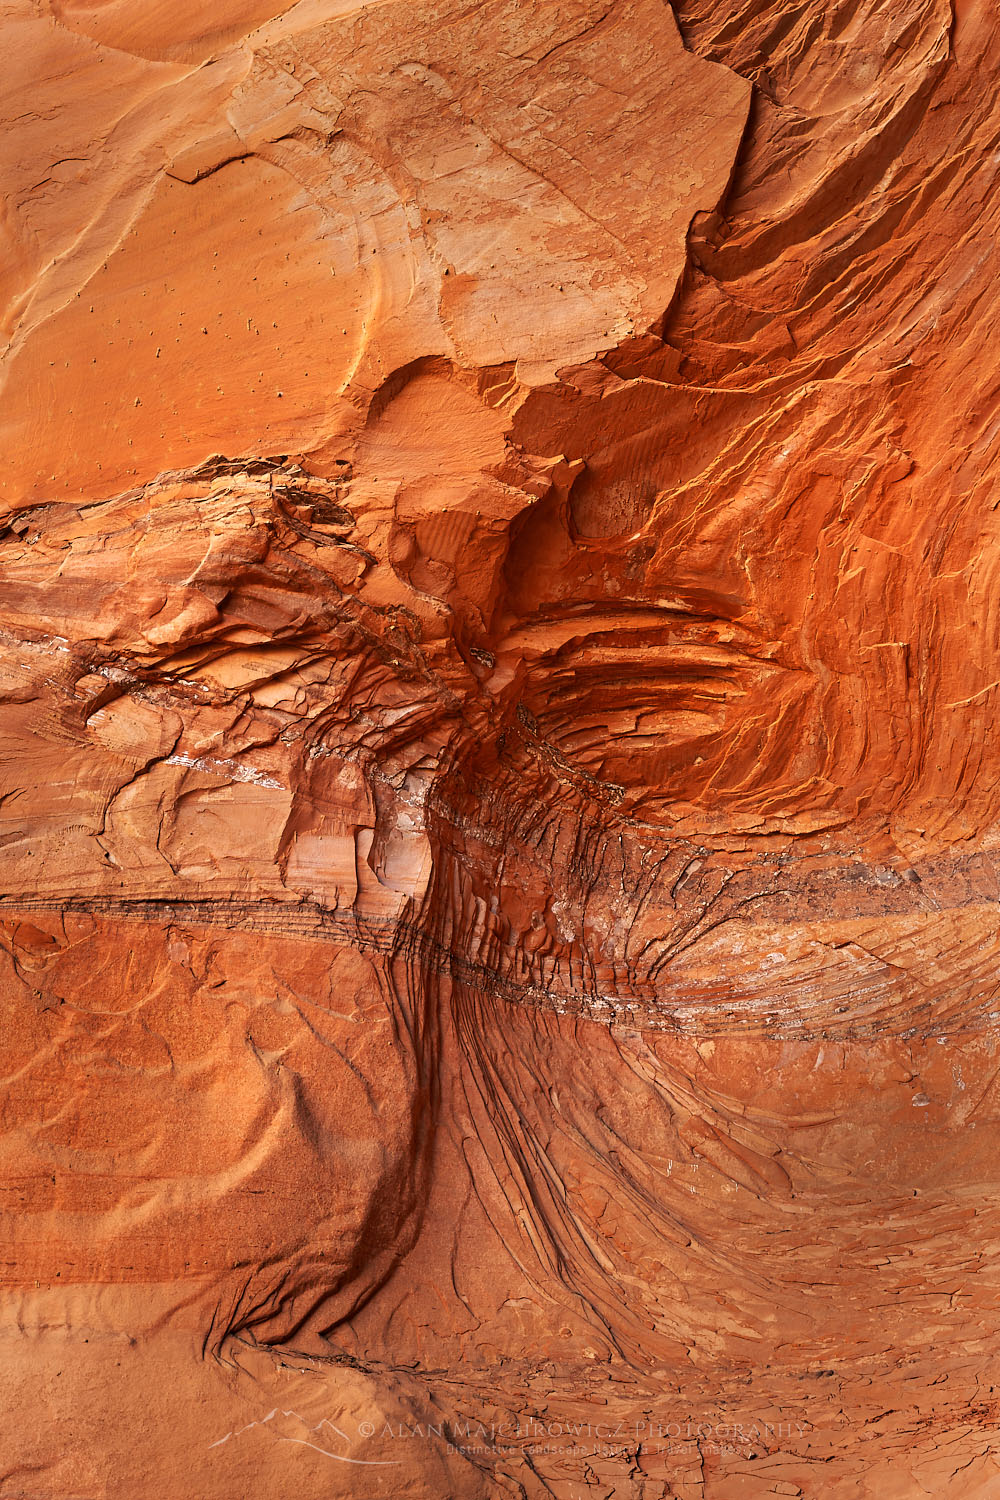 Sandstone canyon wall patterns resembling an archaeopteryx fossil in Coyote Gulch, Glen Canyon National Recreation Area Utah #76313